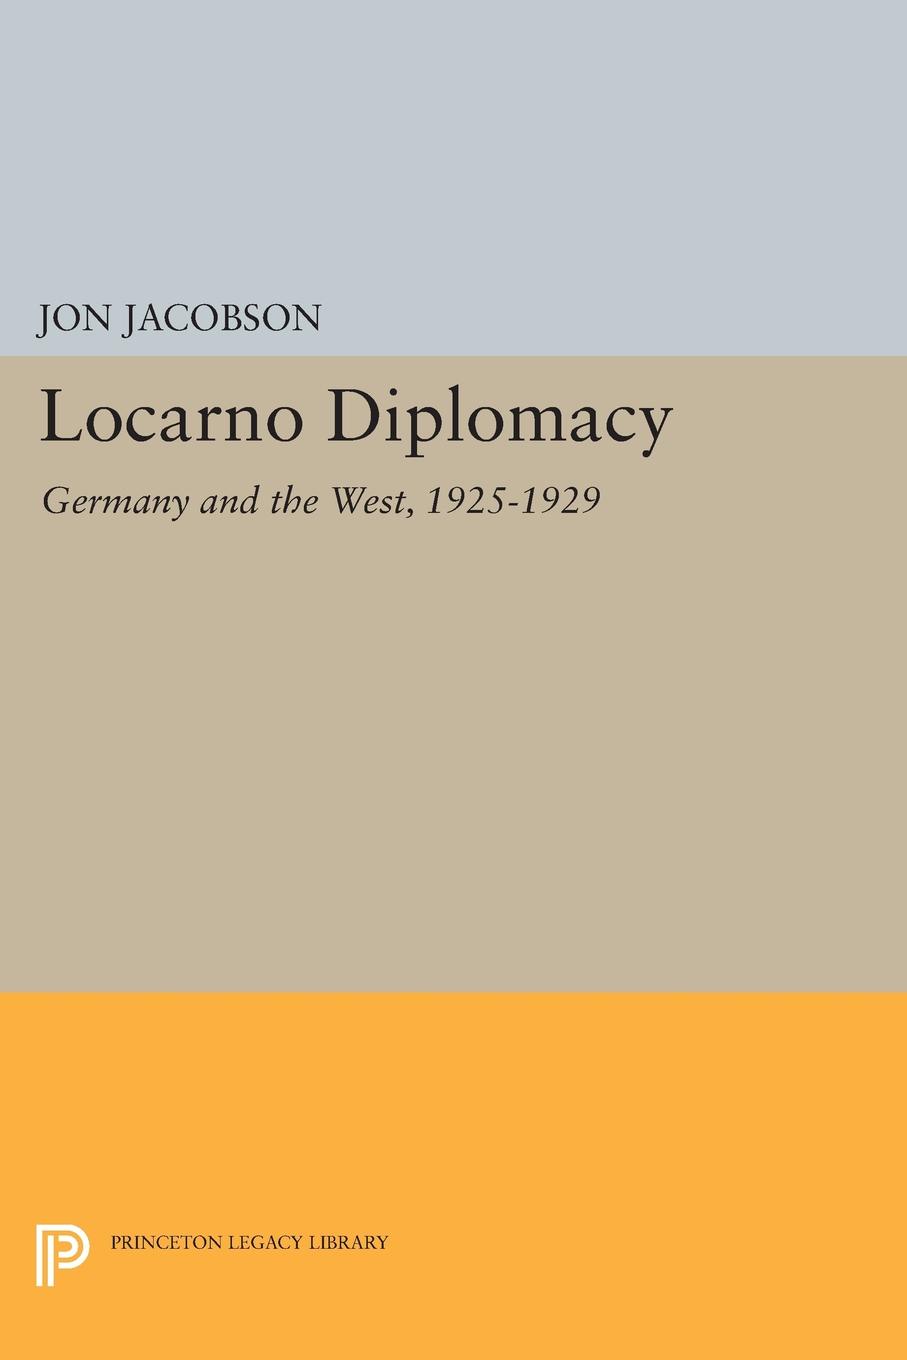 Locarno Diplomacy. Germany and the West, 1925-1929